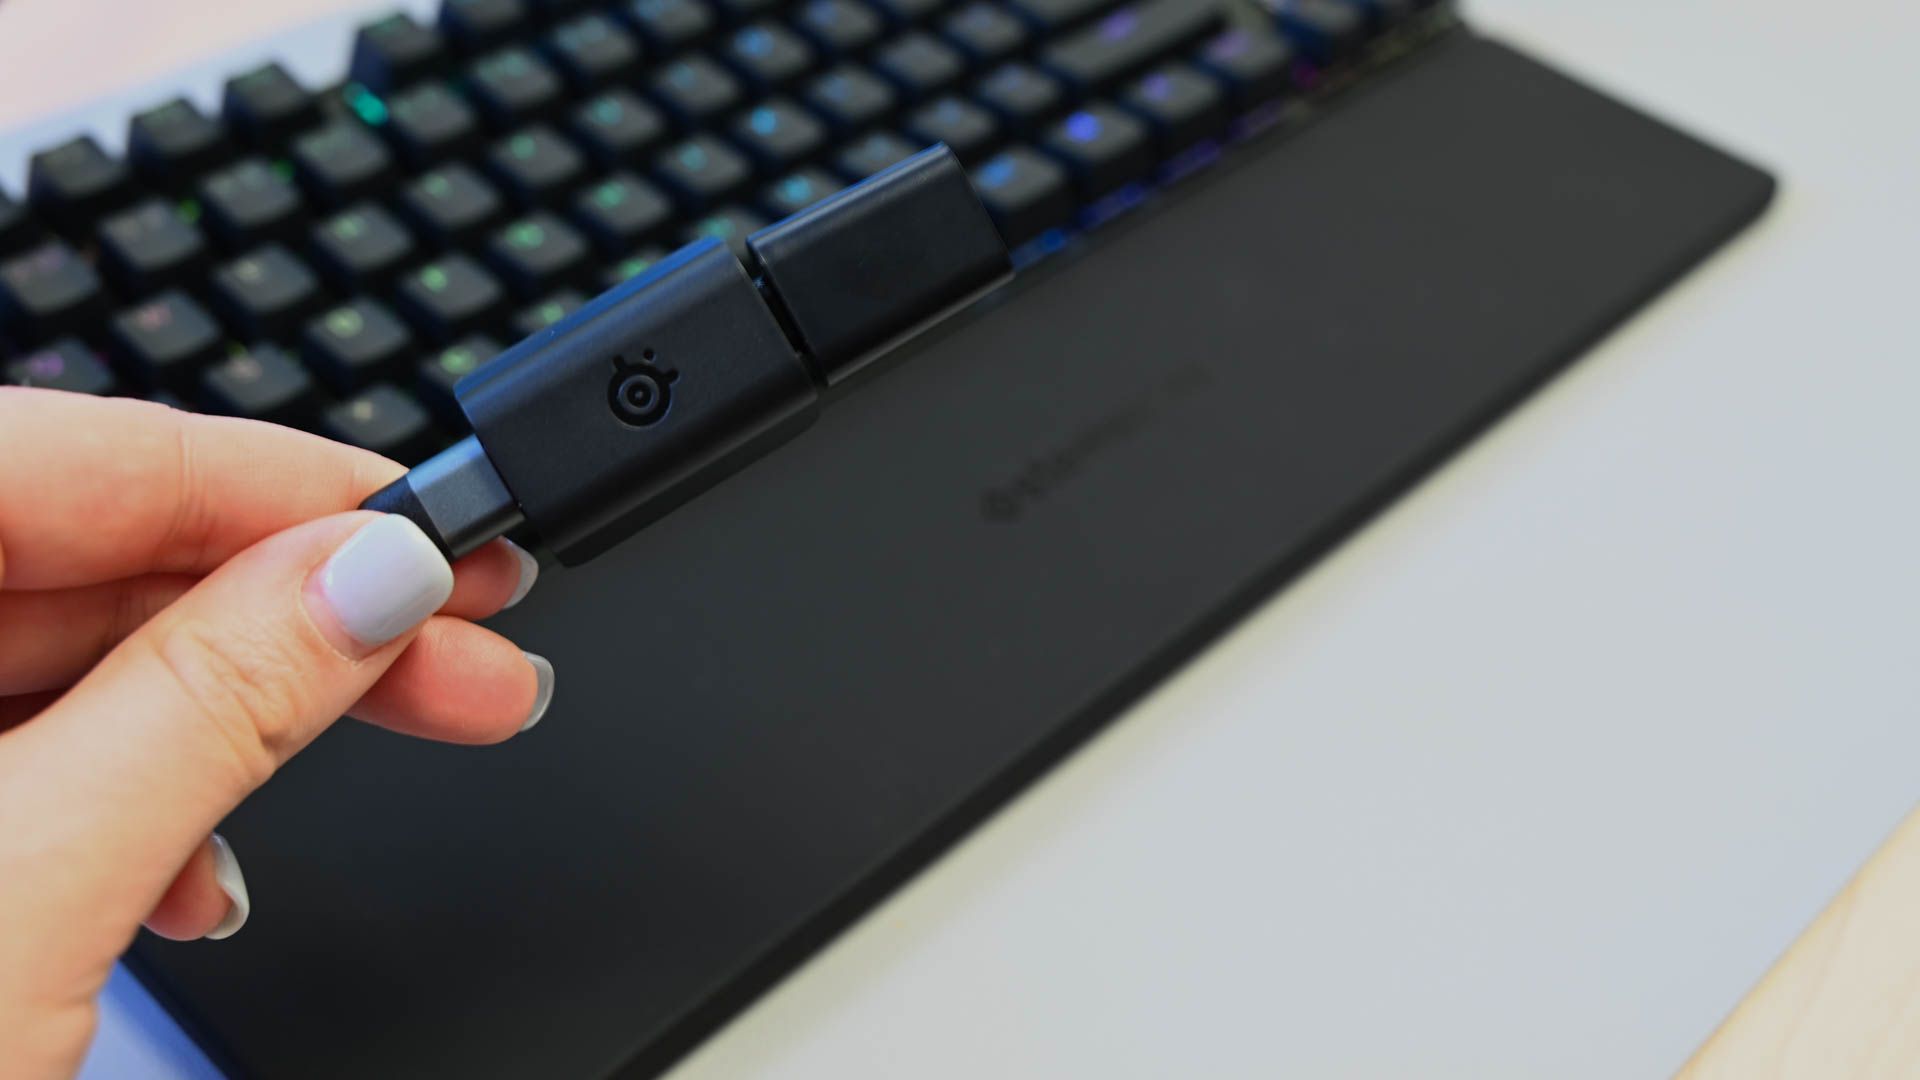 Bluetooth Dongle for SteelSeries Apex Pro TKL Keyboard.